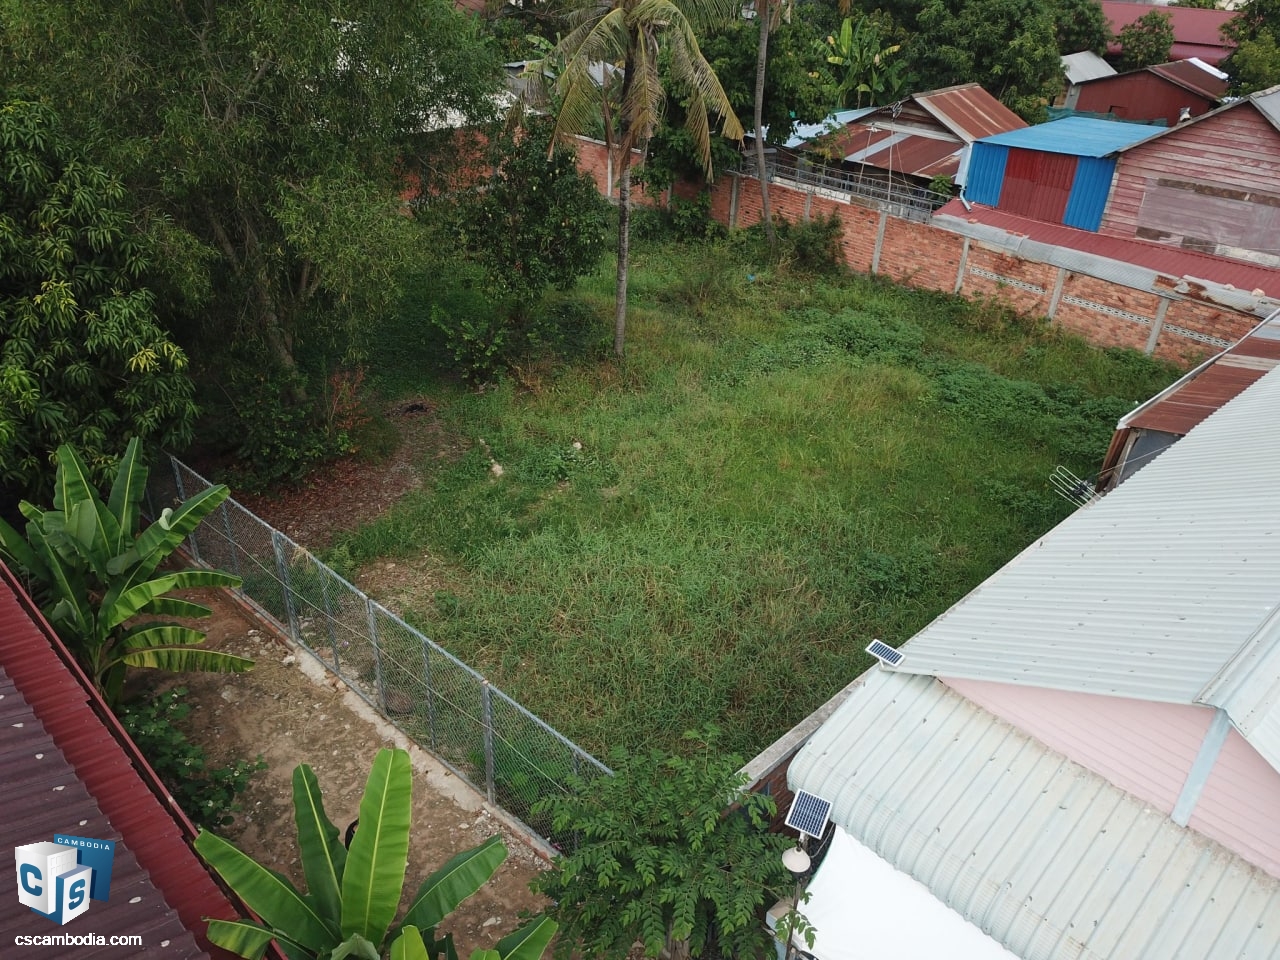 Land for Sale in Siem Reap, Cambodia